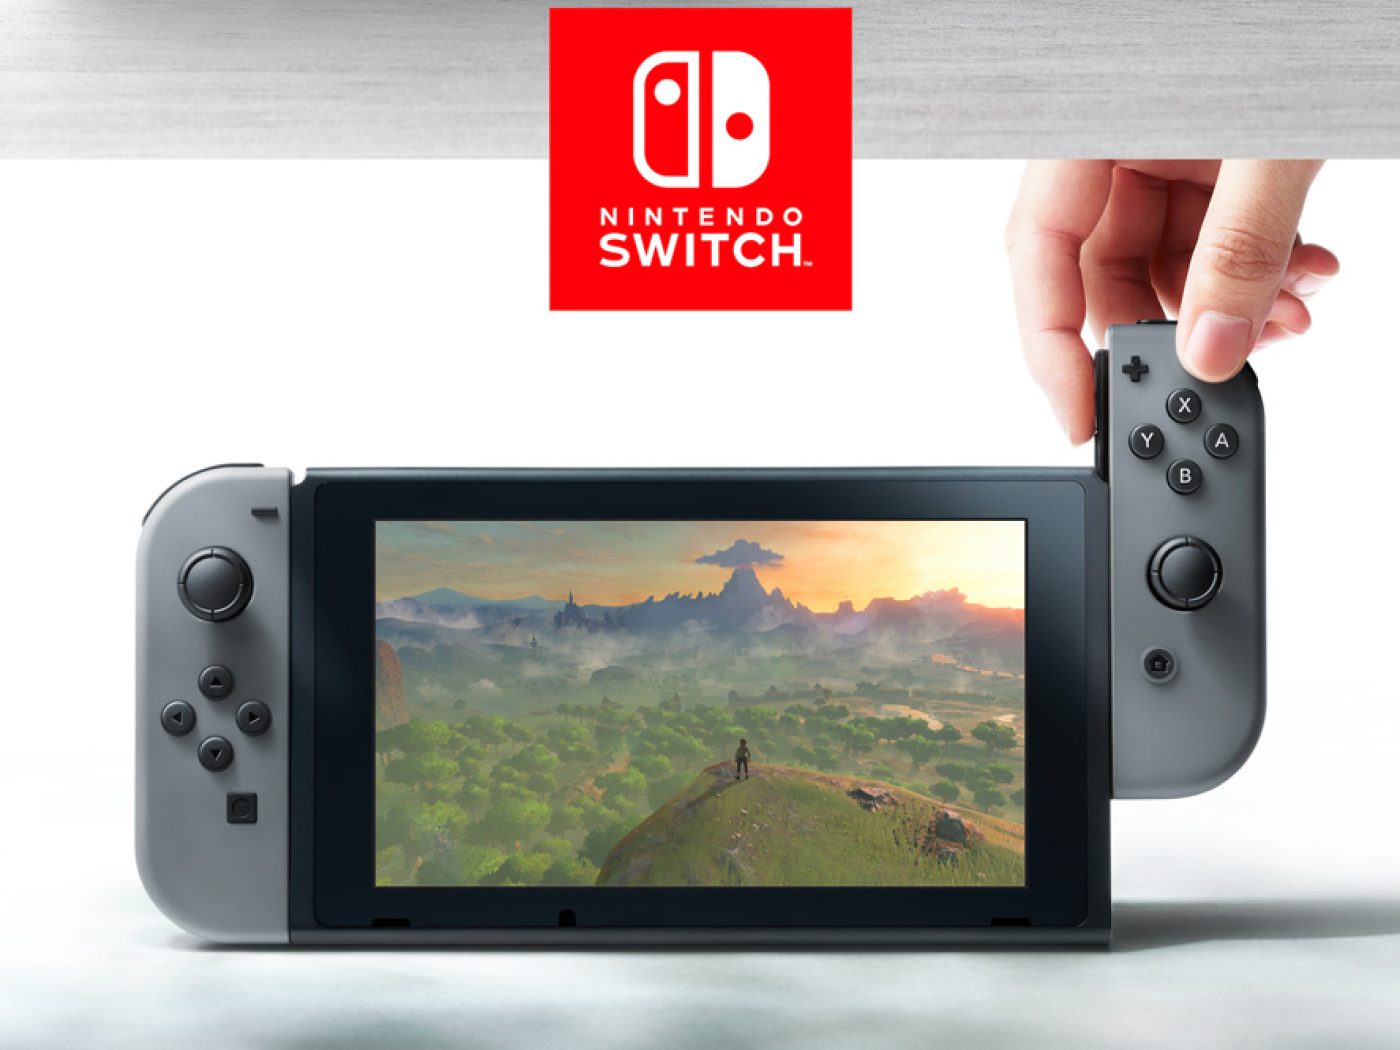 Uitgaven Plak opnieuw Kwestie Every new game shown off in the first Nintendo Switch trailer